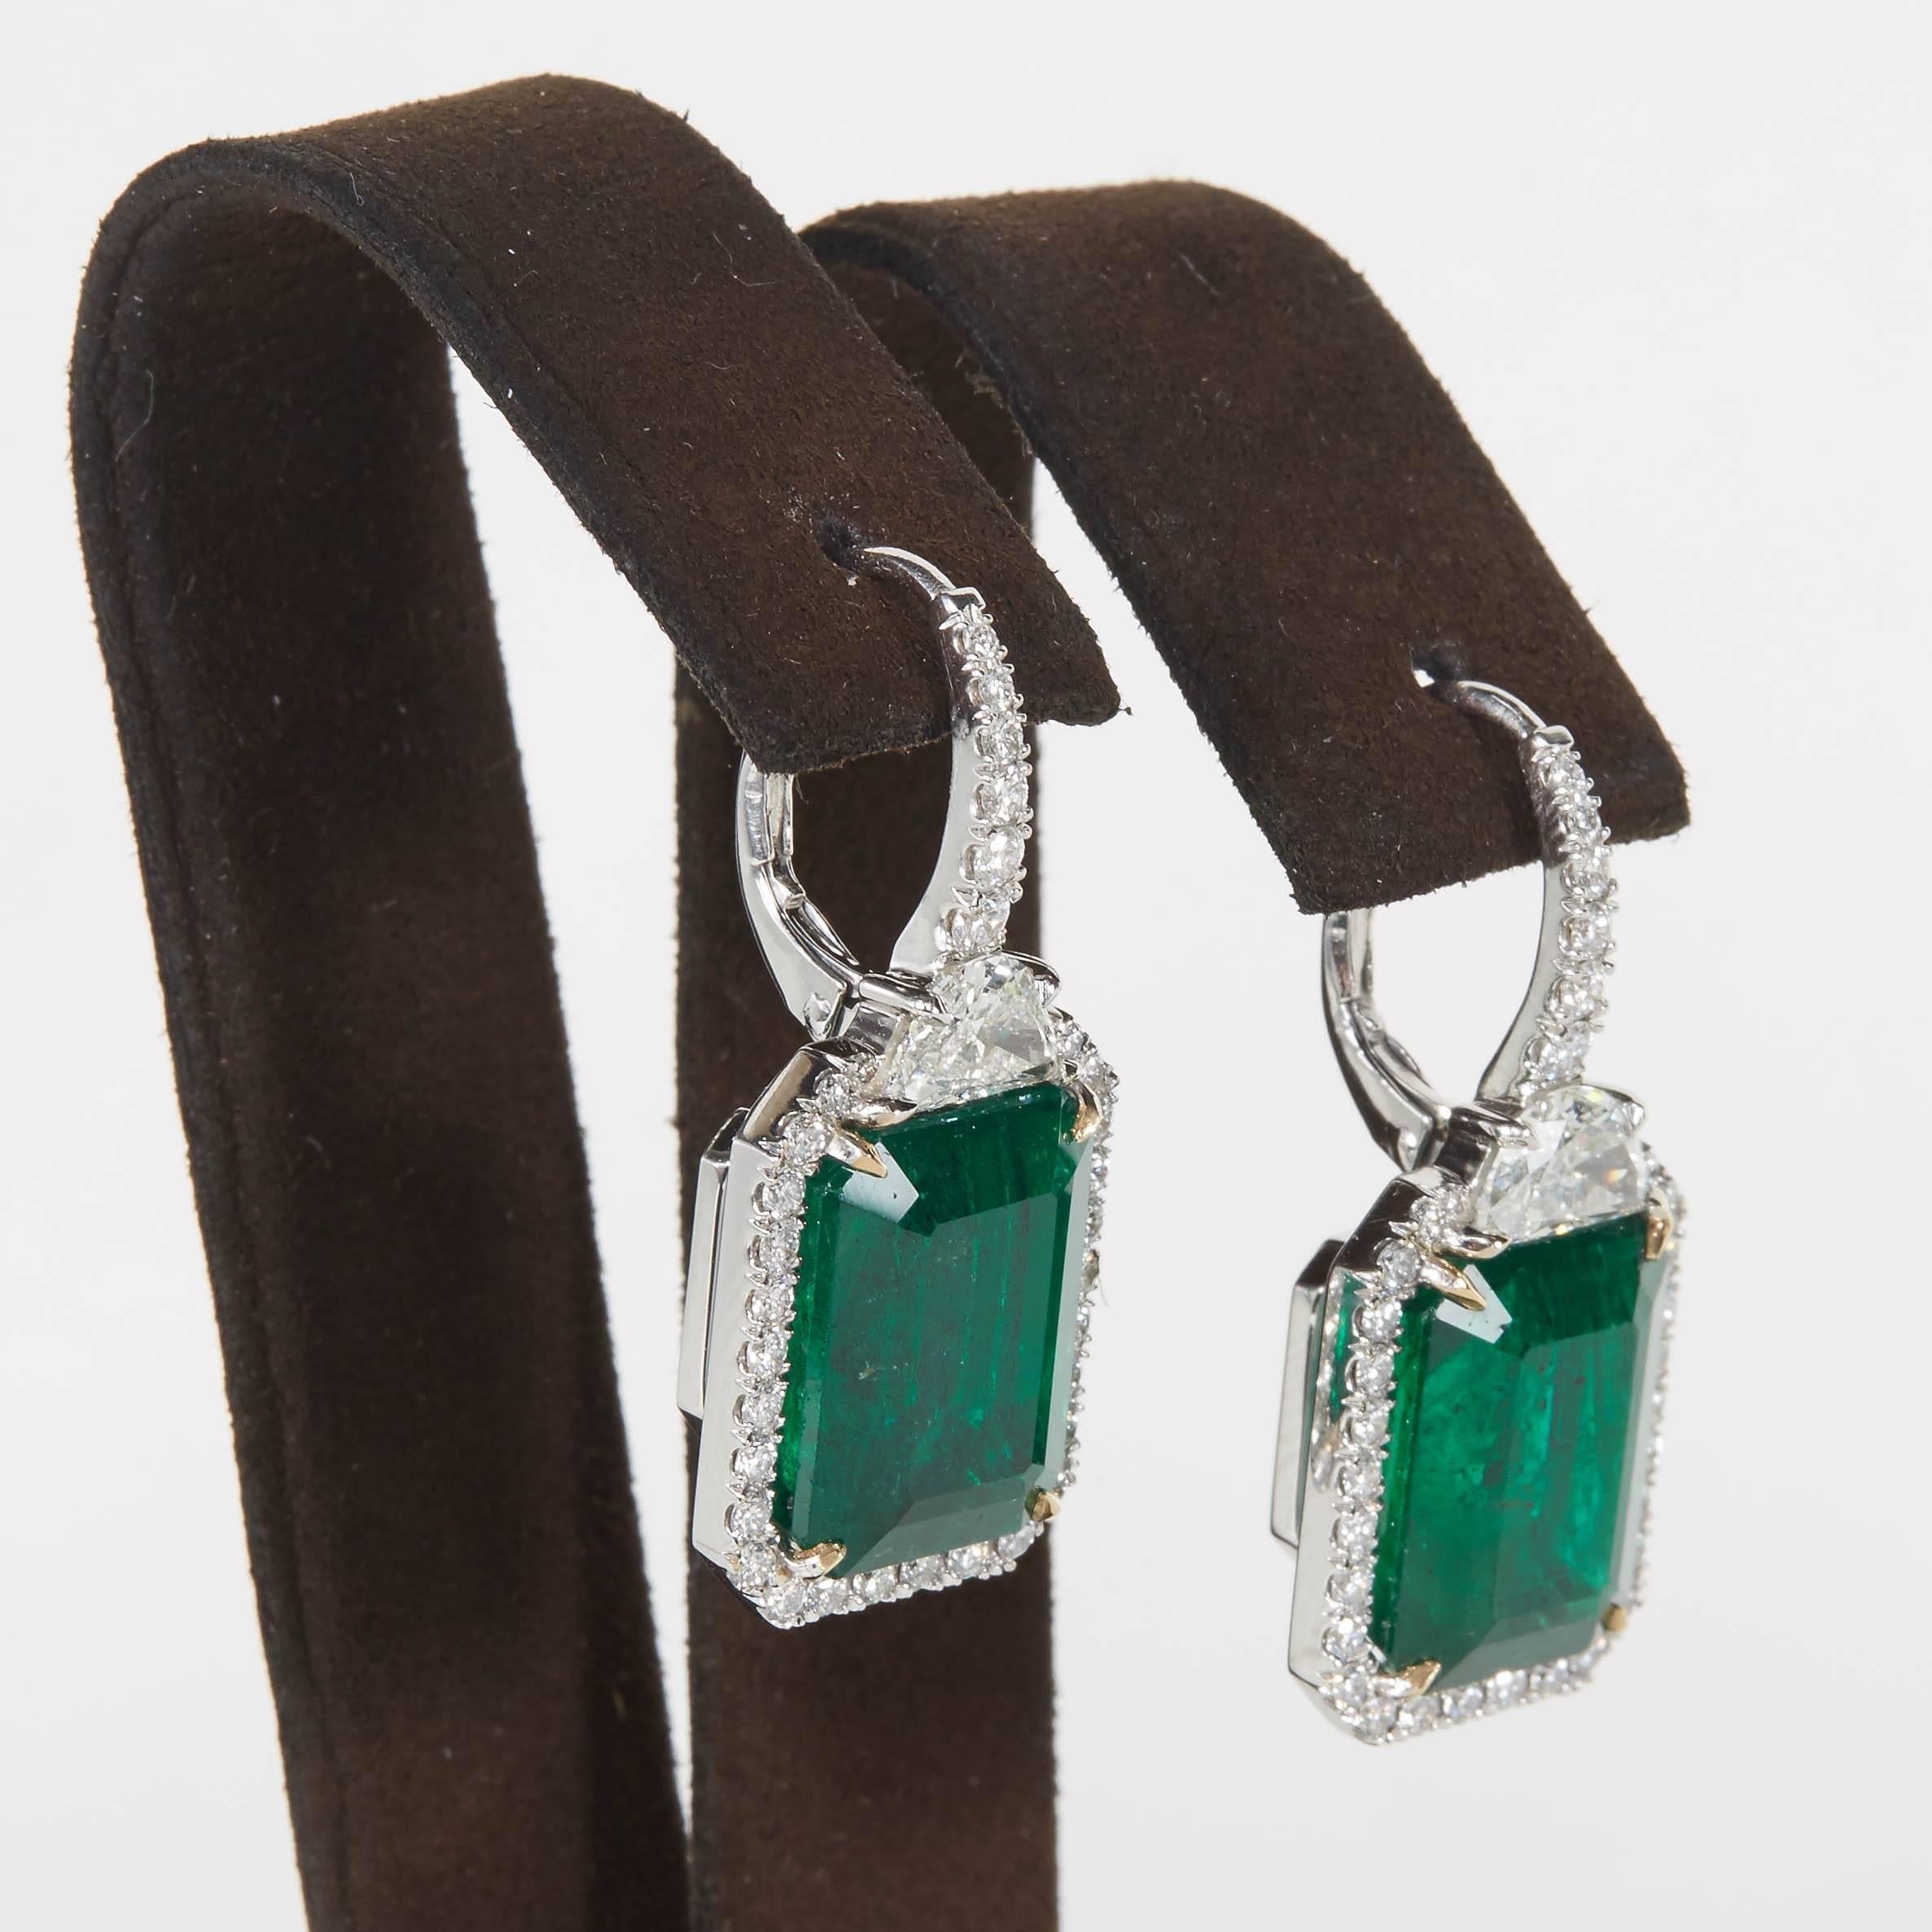 

Beautiful rich Green Emeralds pop in this comfortable and wearable earring. 

19.77 carats of Fine Green Emerald
2.47 carats of white diamonds
18k white gold 

1.26 inches long and just under half an inch wide, approximately. 

Custom made in New